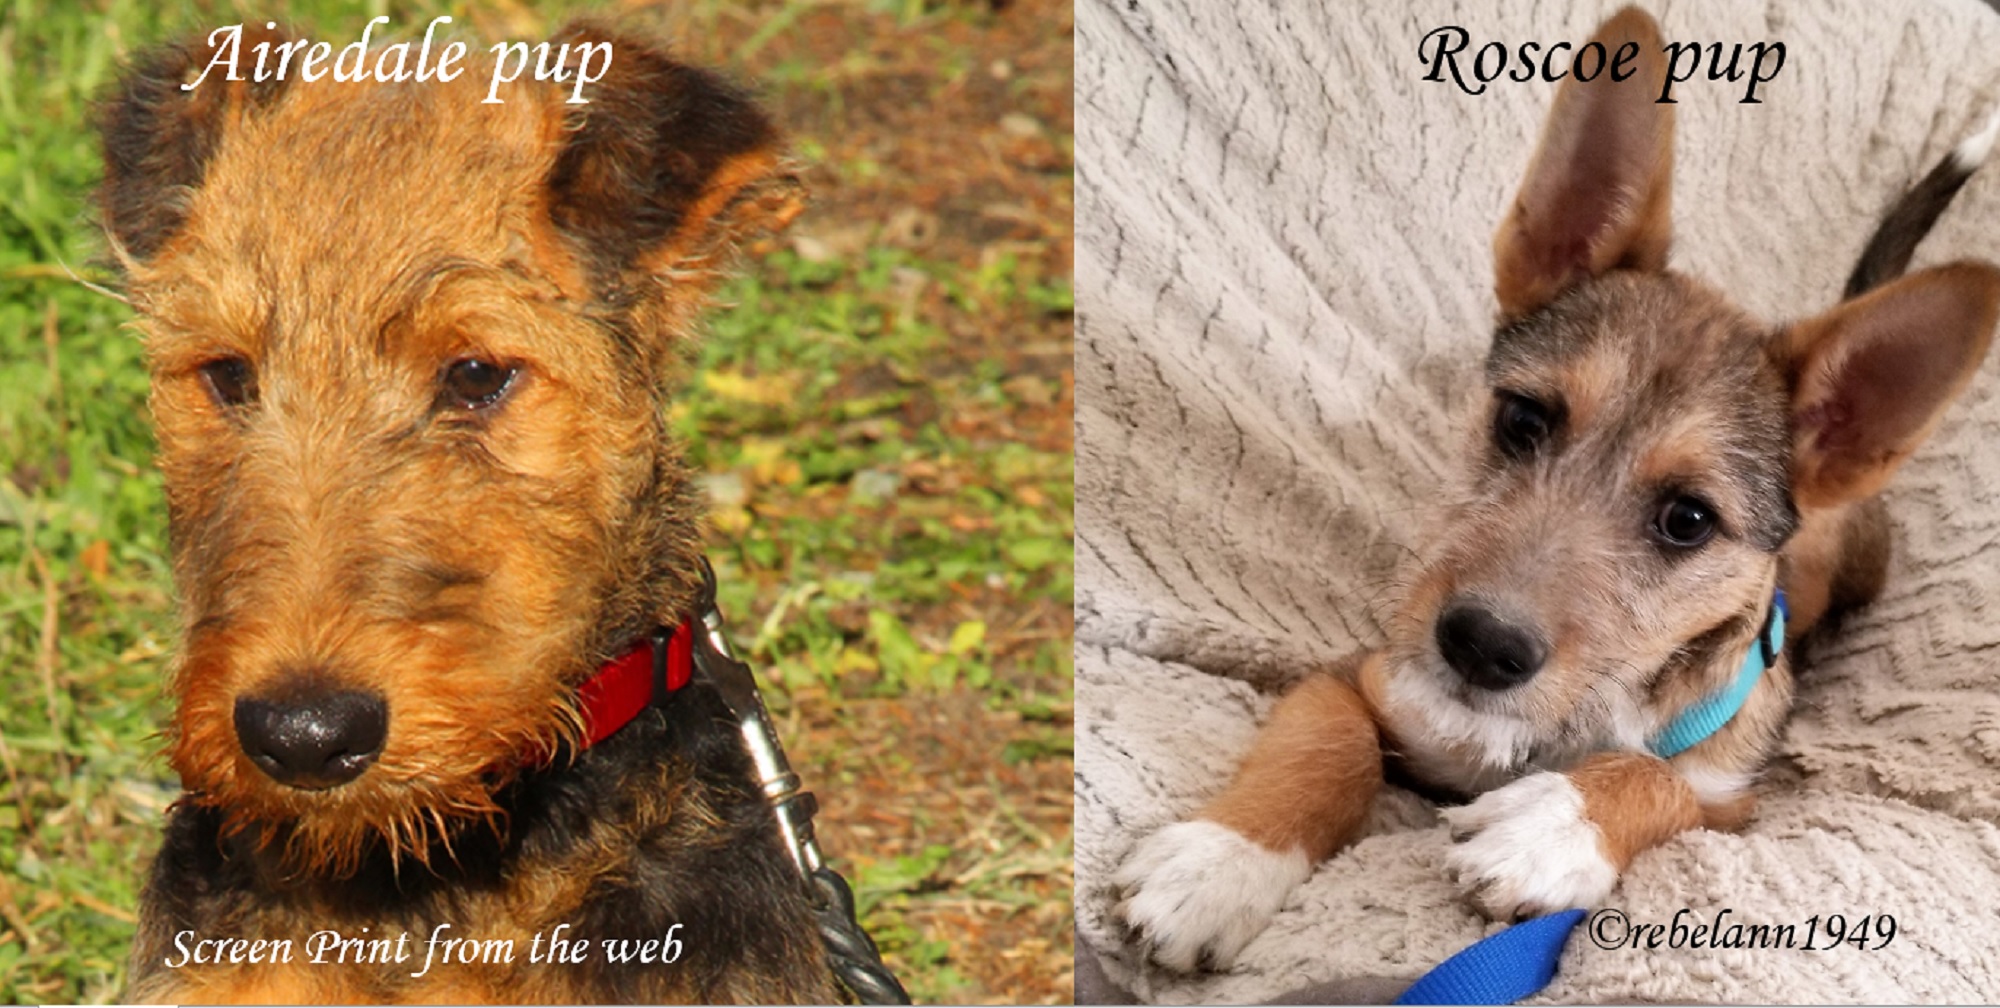 I&#039;m trying to see what kind of Terrier Roscoe is mixed with, do you see Airedale in him?